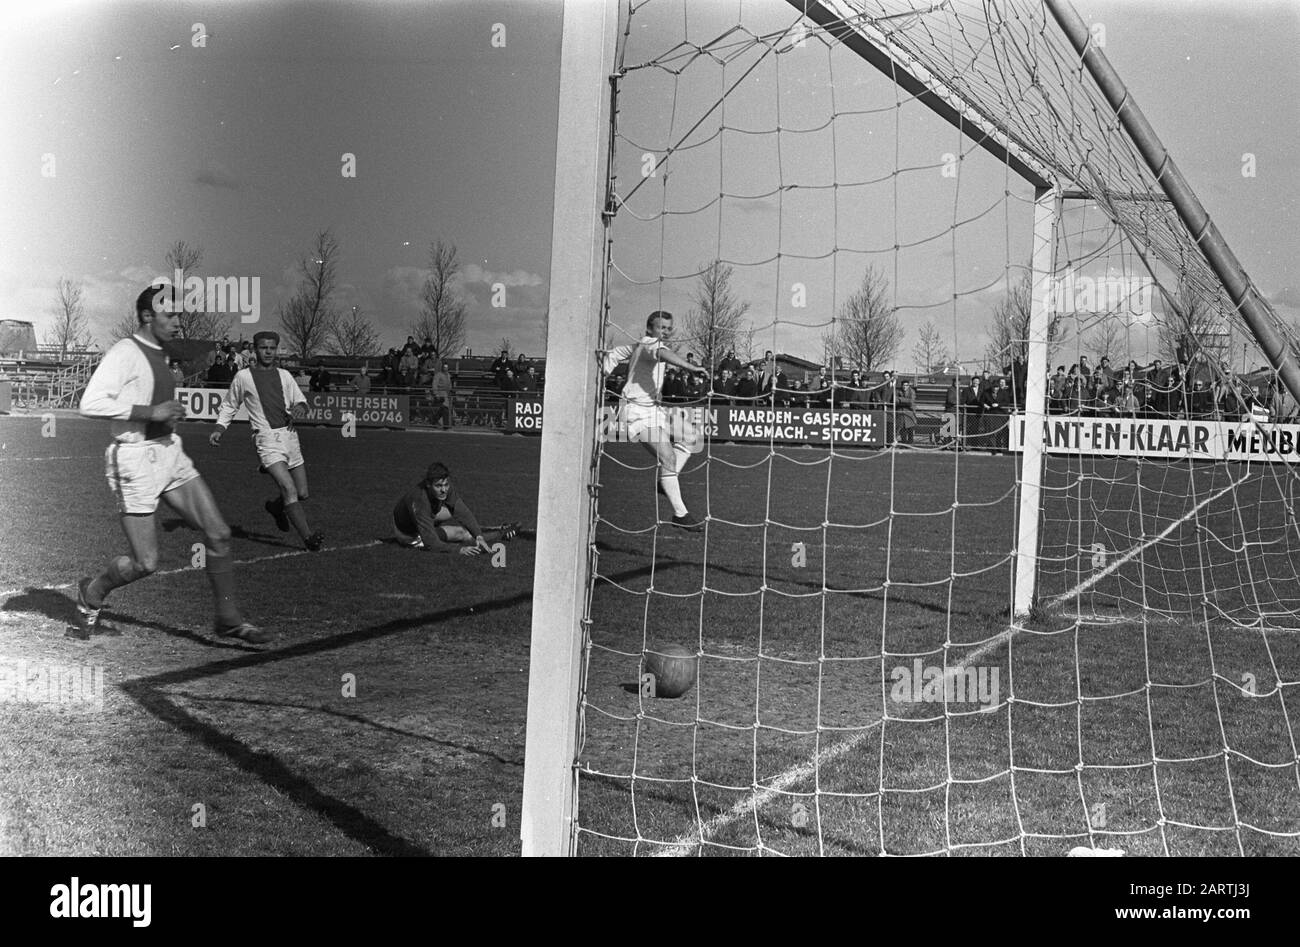 Volewijckers against Eindhoven 1-0, Engelsma (VW) scores, goalkeeper Bax is beaten Date: 23 april 1967 Location: Eindhoven Keywords: goalkeepers, sport, football Personal name: Engelsma Institution name : Volewijckers Stock Photo